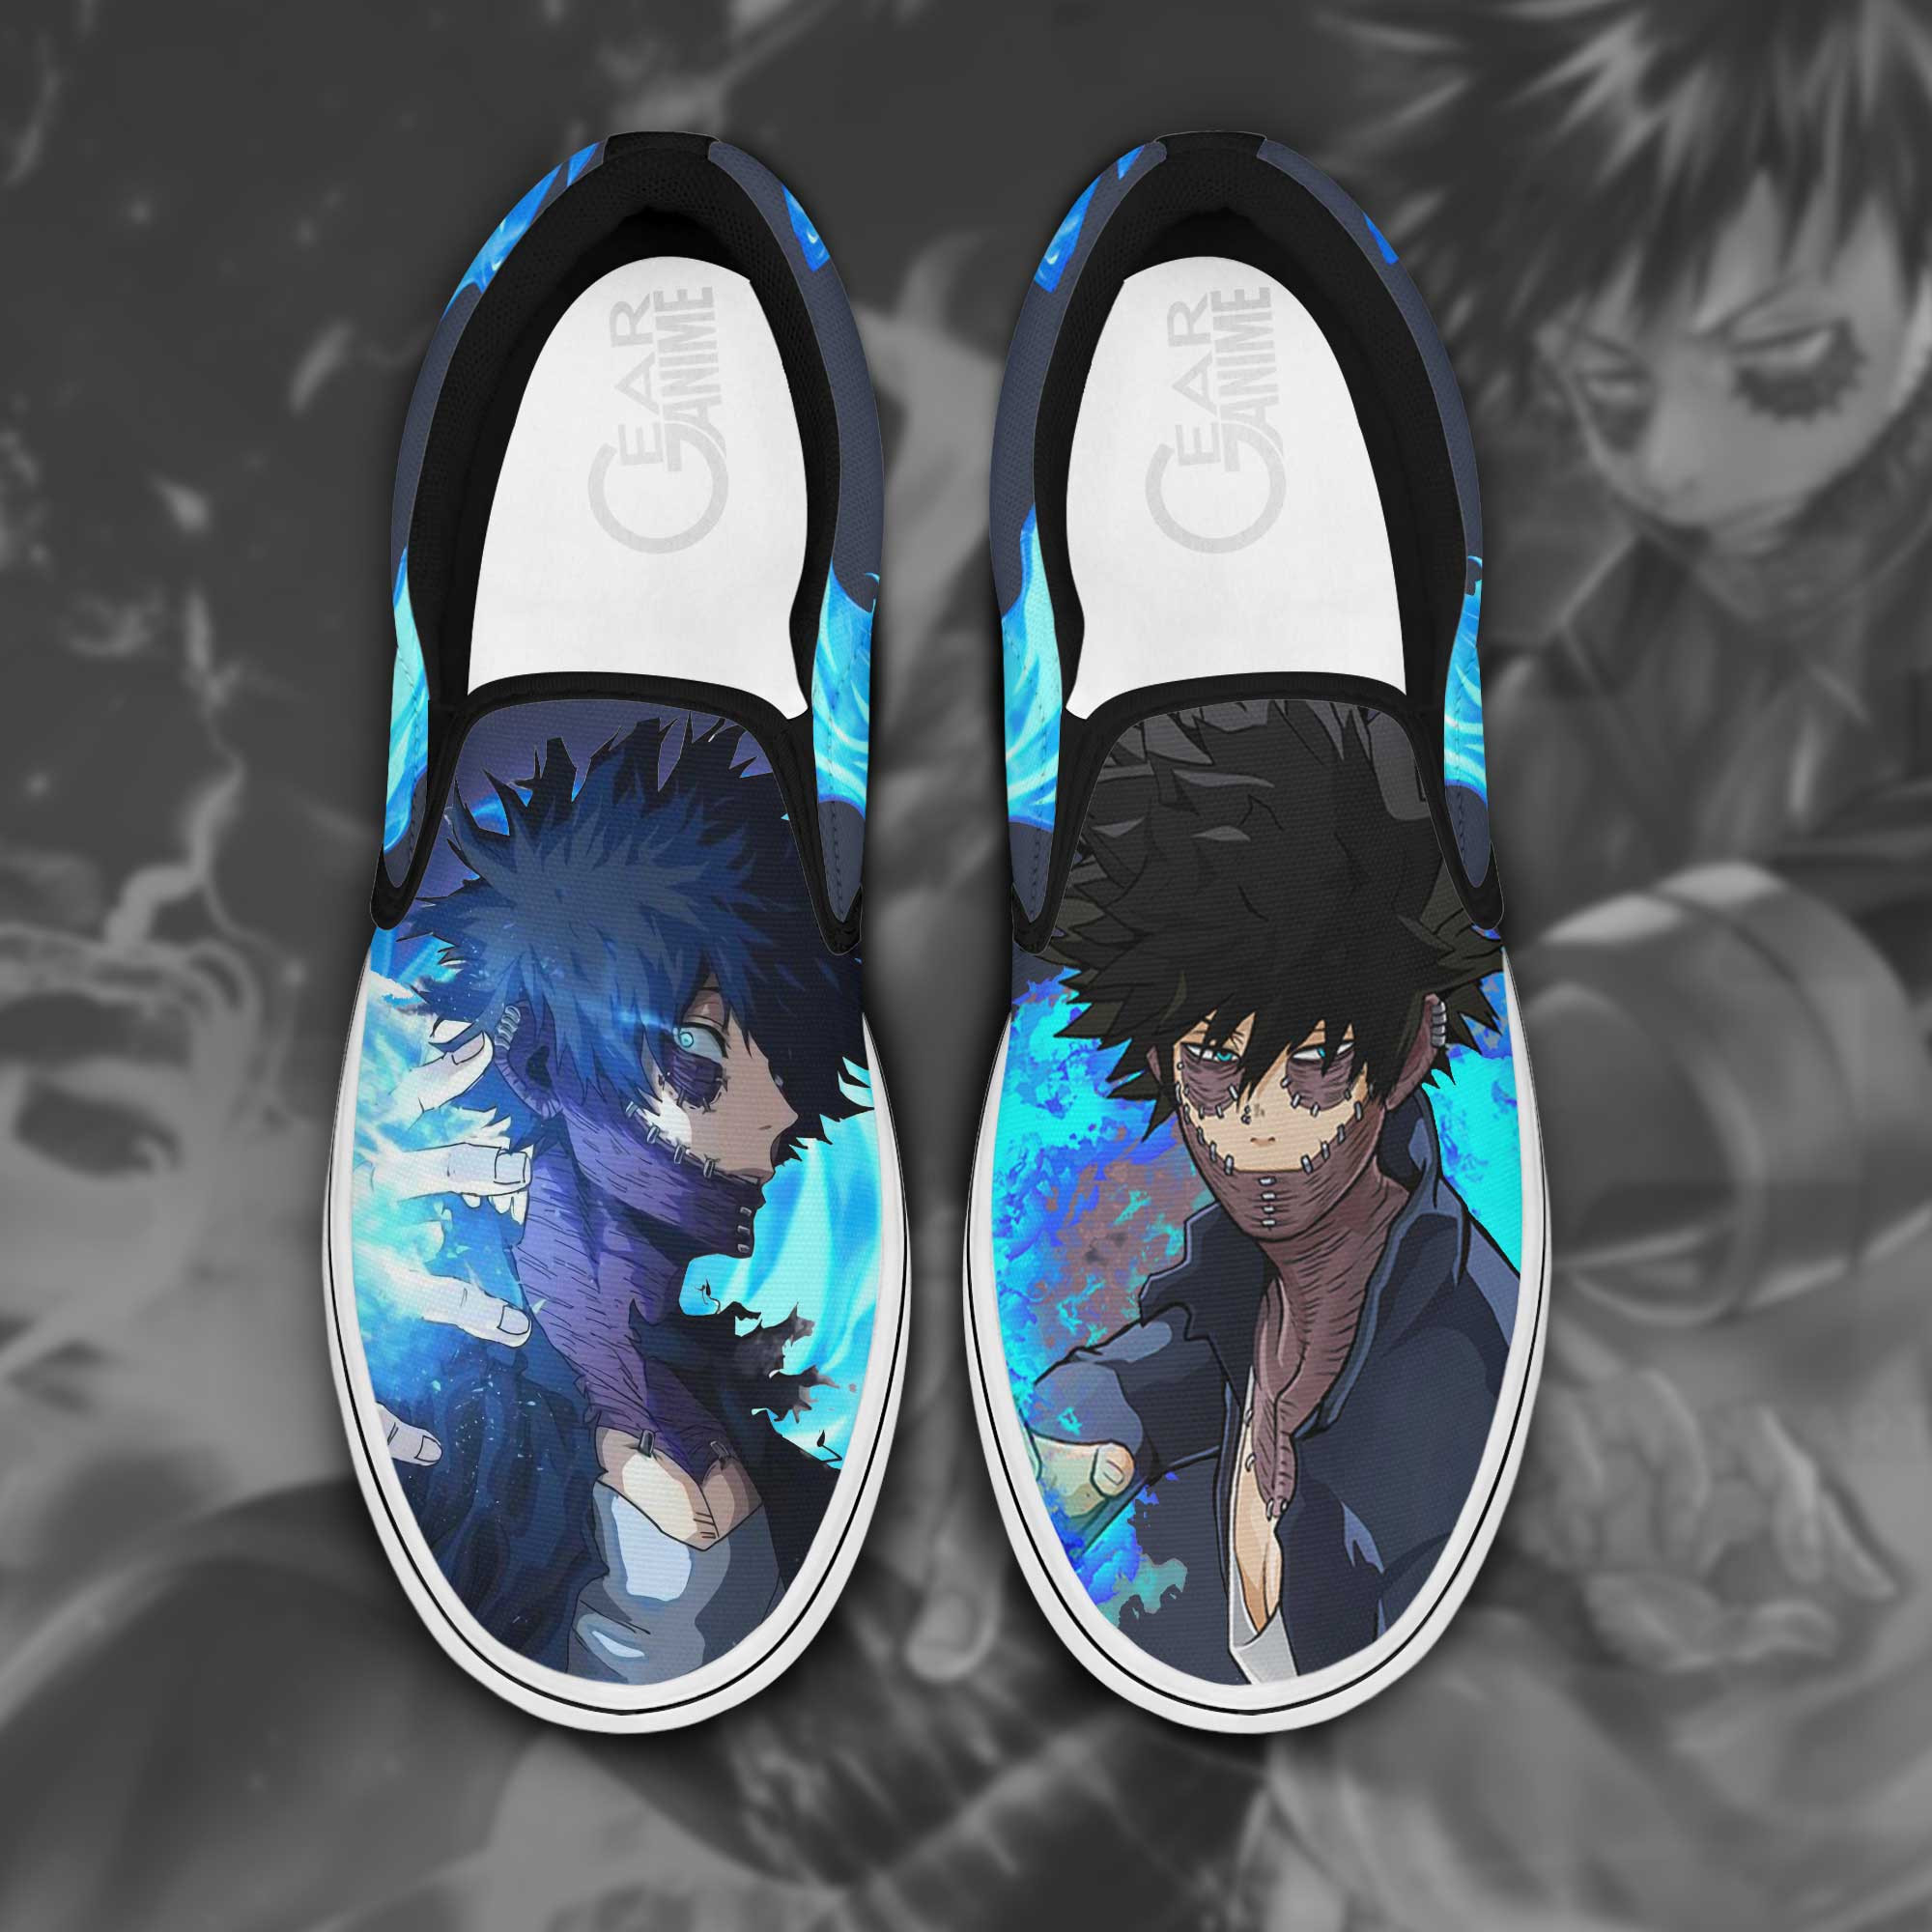 These Sneakers are a must-have for any Anime fan 97